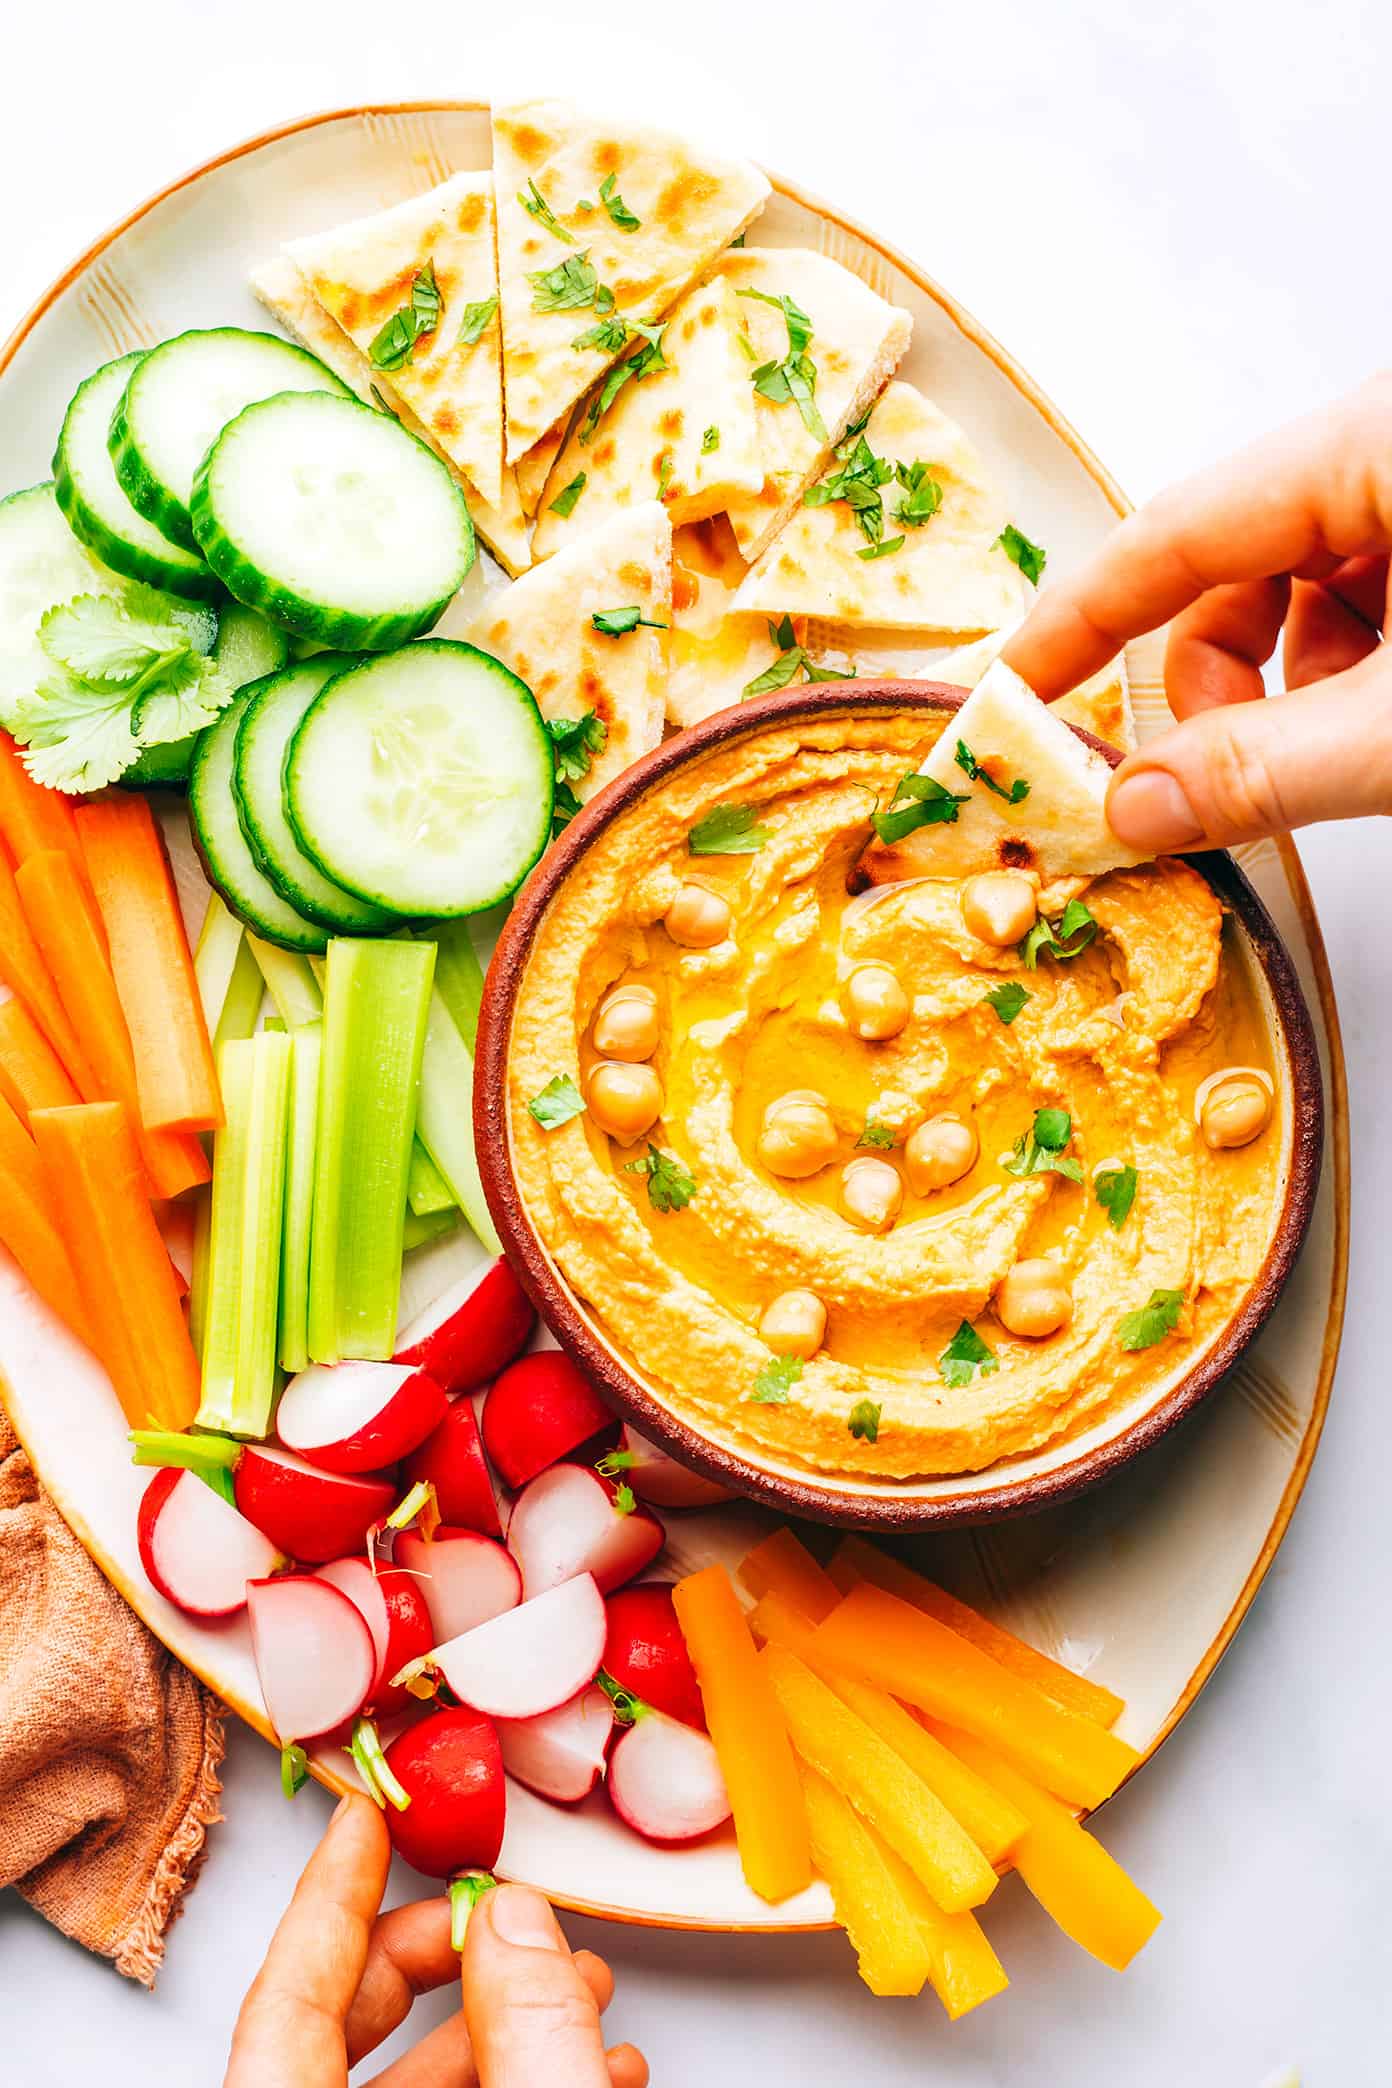 Thai Red Curry Hummus on Platter with Crudites and Naan